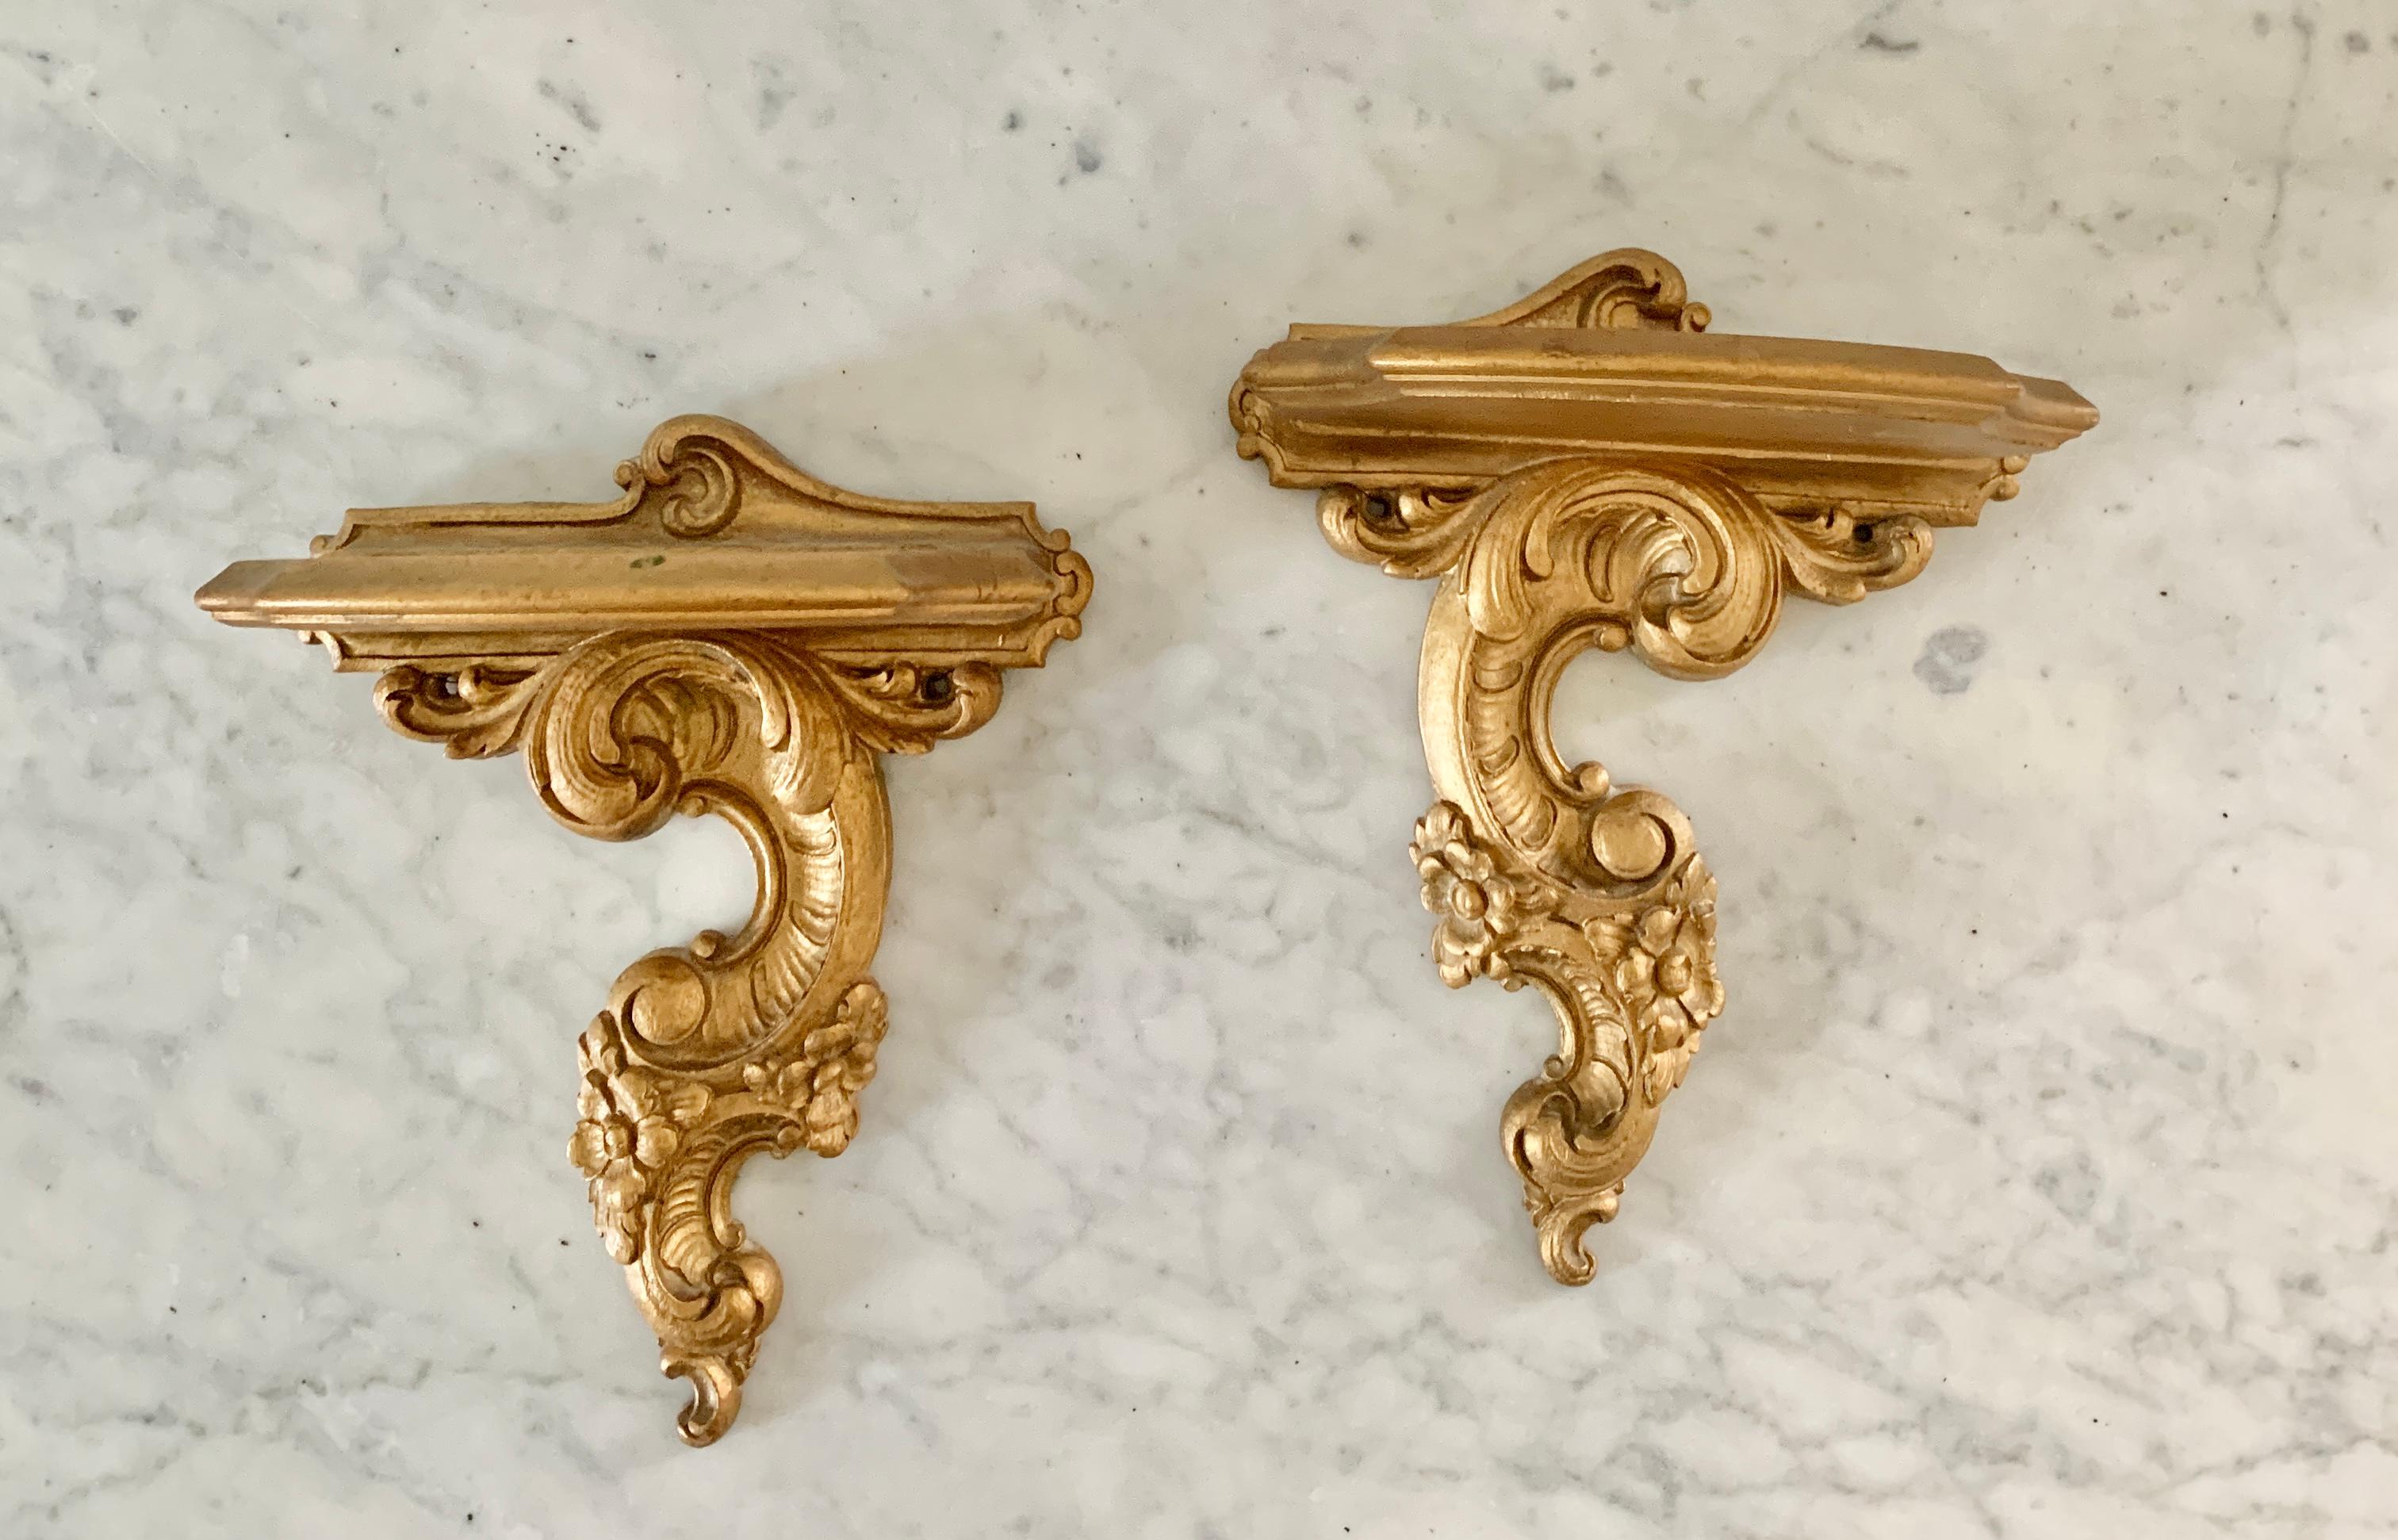 A gorgeous pair of neoclassical or Rococo style giltwood wall sconces or brackets

USA, circa Mid-20th Century

Measures: 6.75